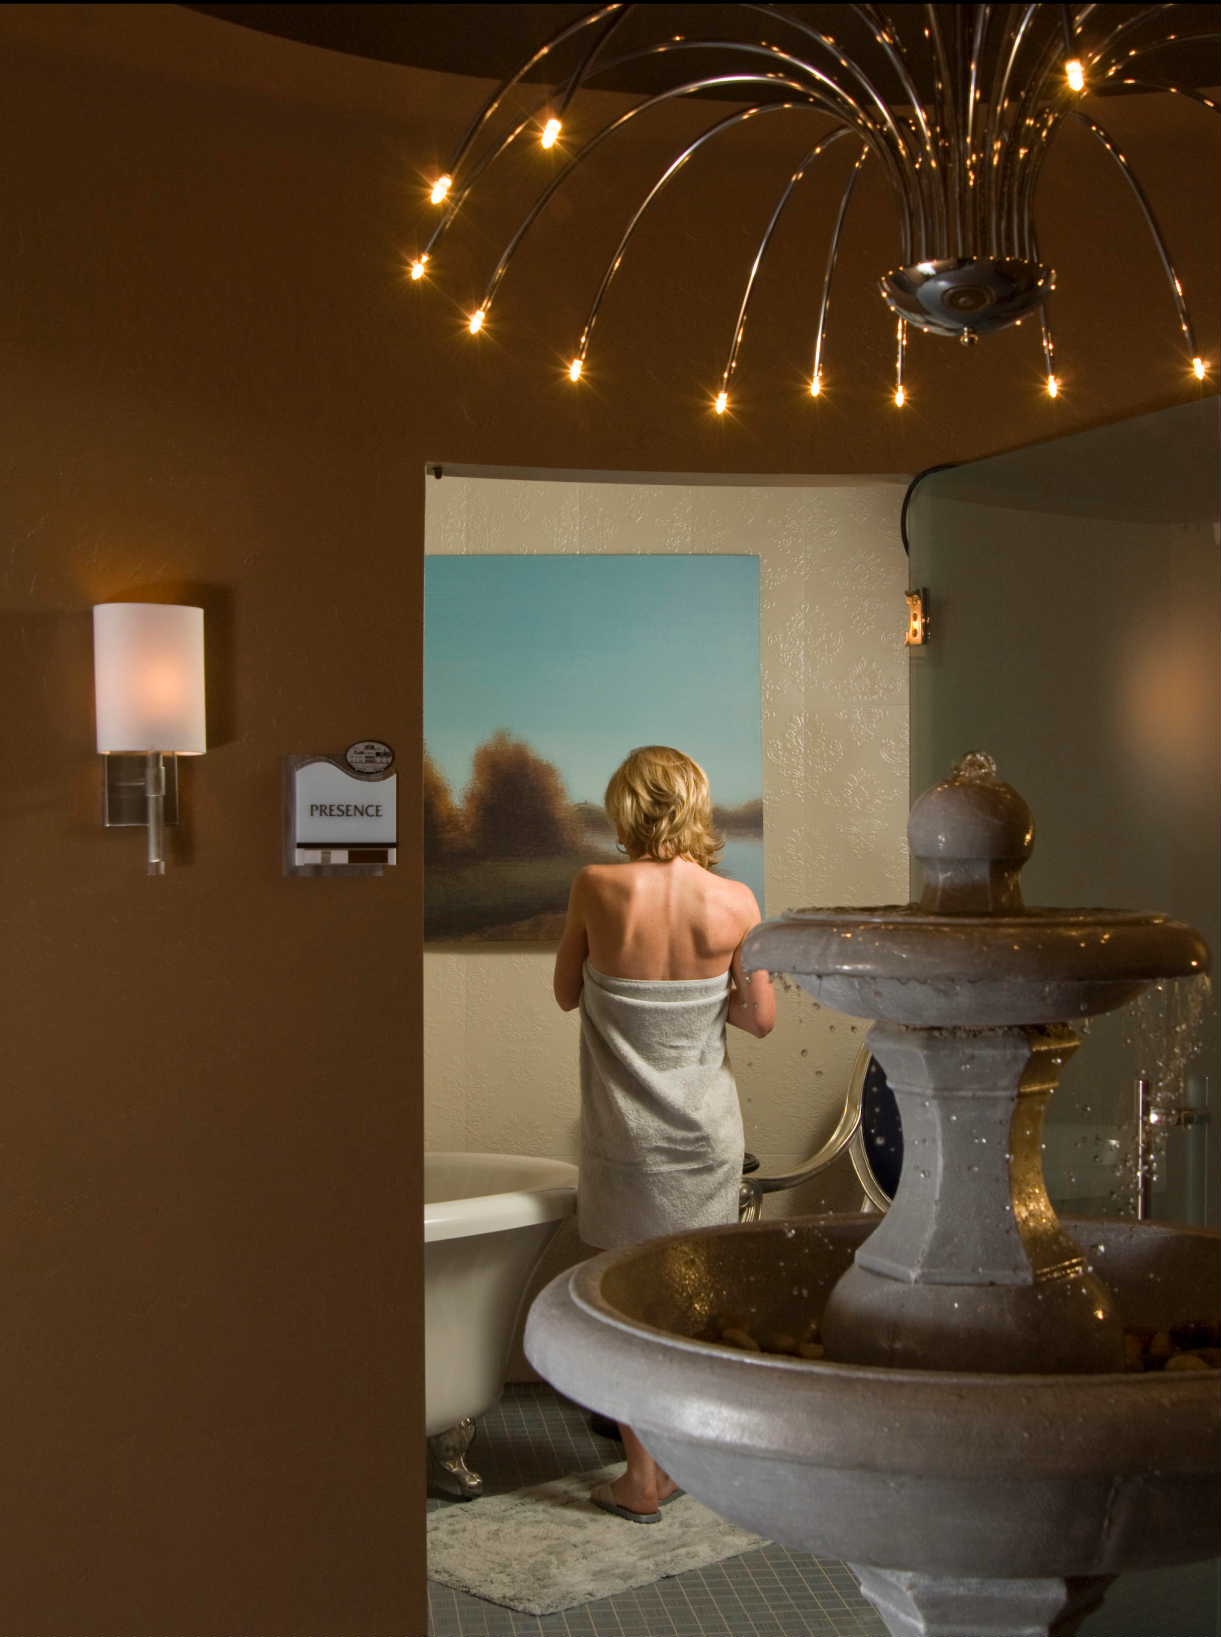 Spa of the Rockies adds unexpected extras to treatments including footbaths and customized aromatherapy